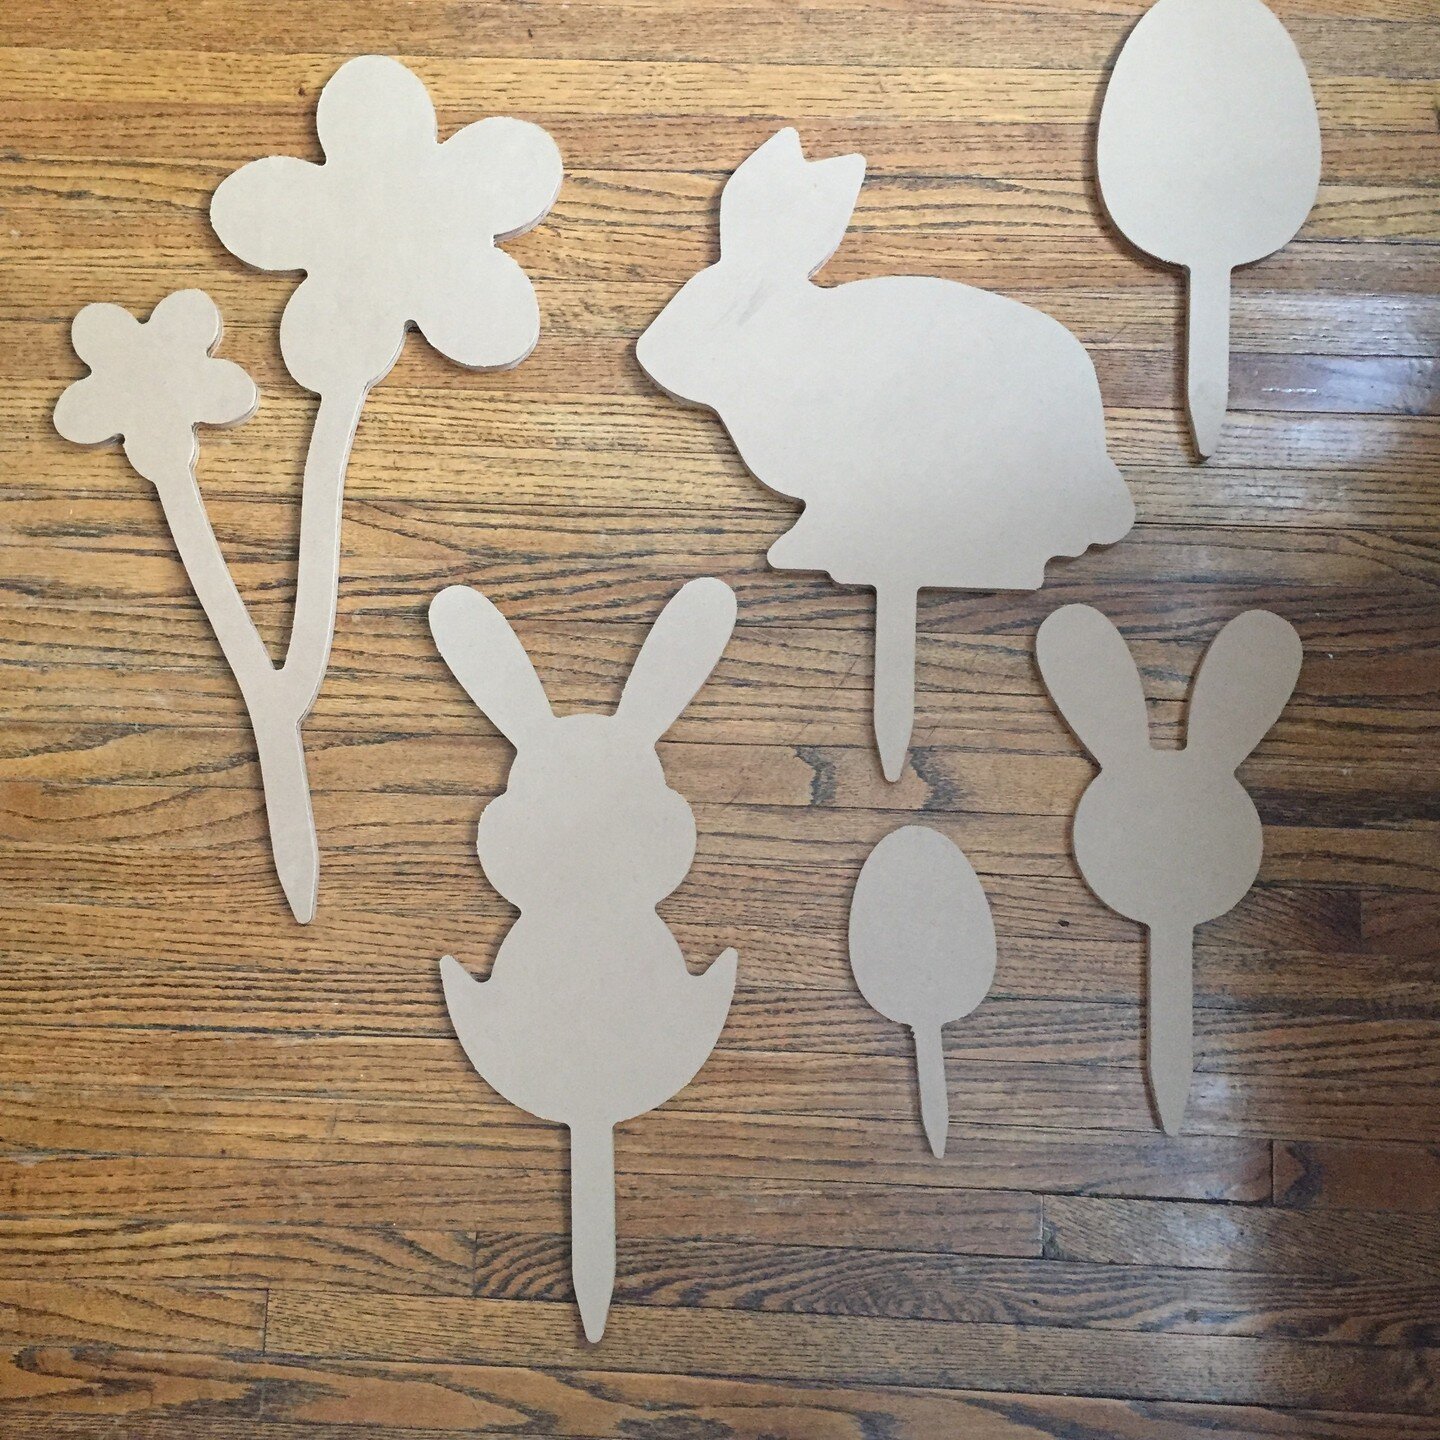 Happy Easter! 
Our General Manager created these fun wooden shapes for kids to enjoy 3 years ago as many of us were hibernating during the pandemic. We sent out an instagram offering these goodies for little artists to explore their creativity. 3 yea